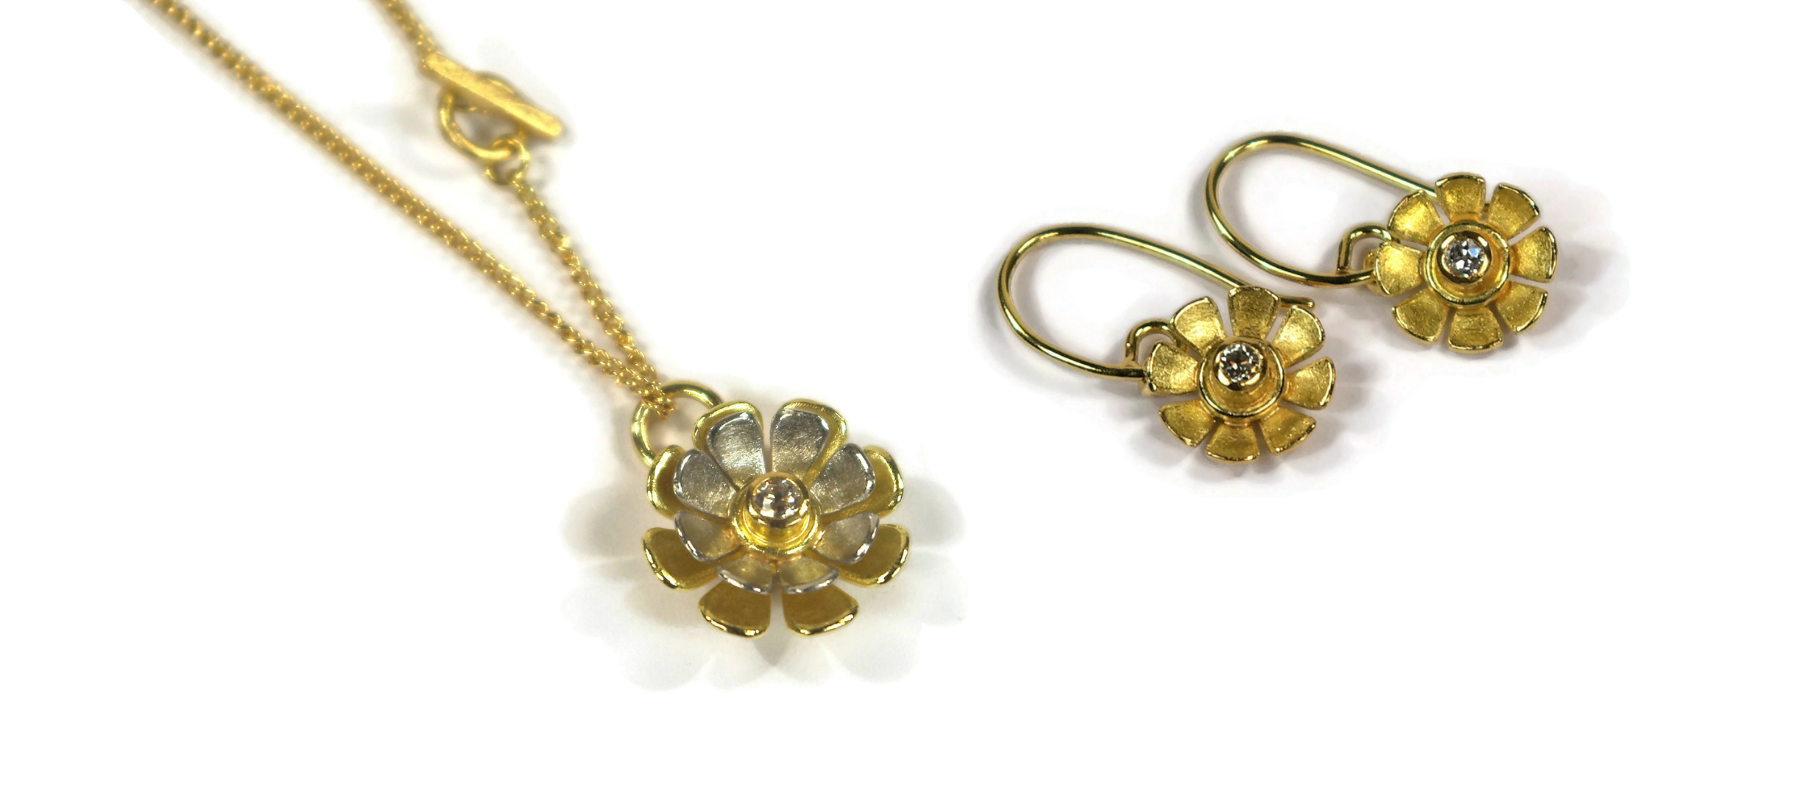 Luane’s Remodelled Gold, Platinum And Diamond Daisy Pendant And Earrings